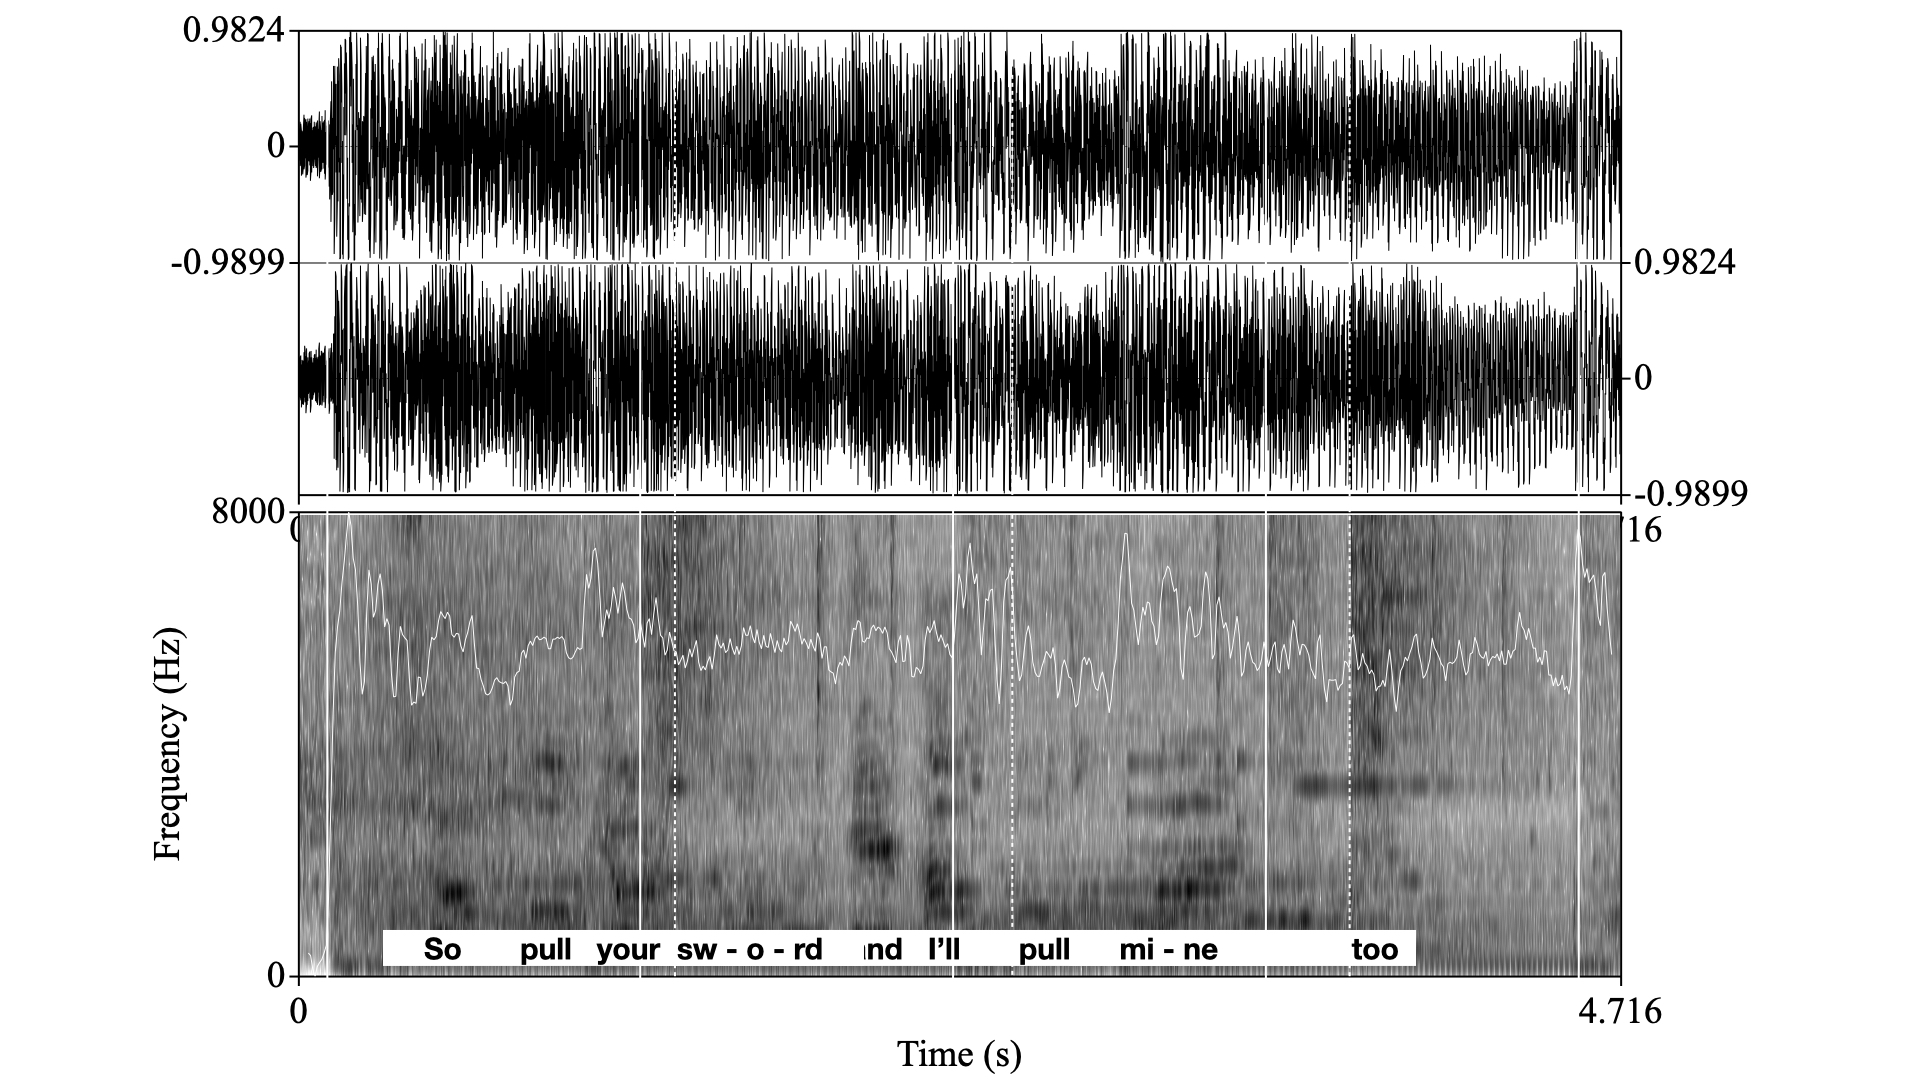 Waveform and spectrogram of the first two bars of chorus 1